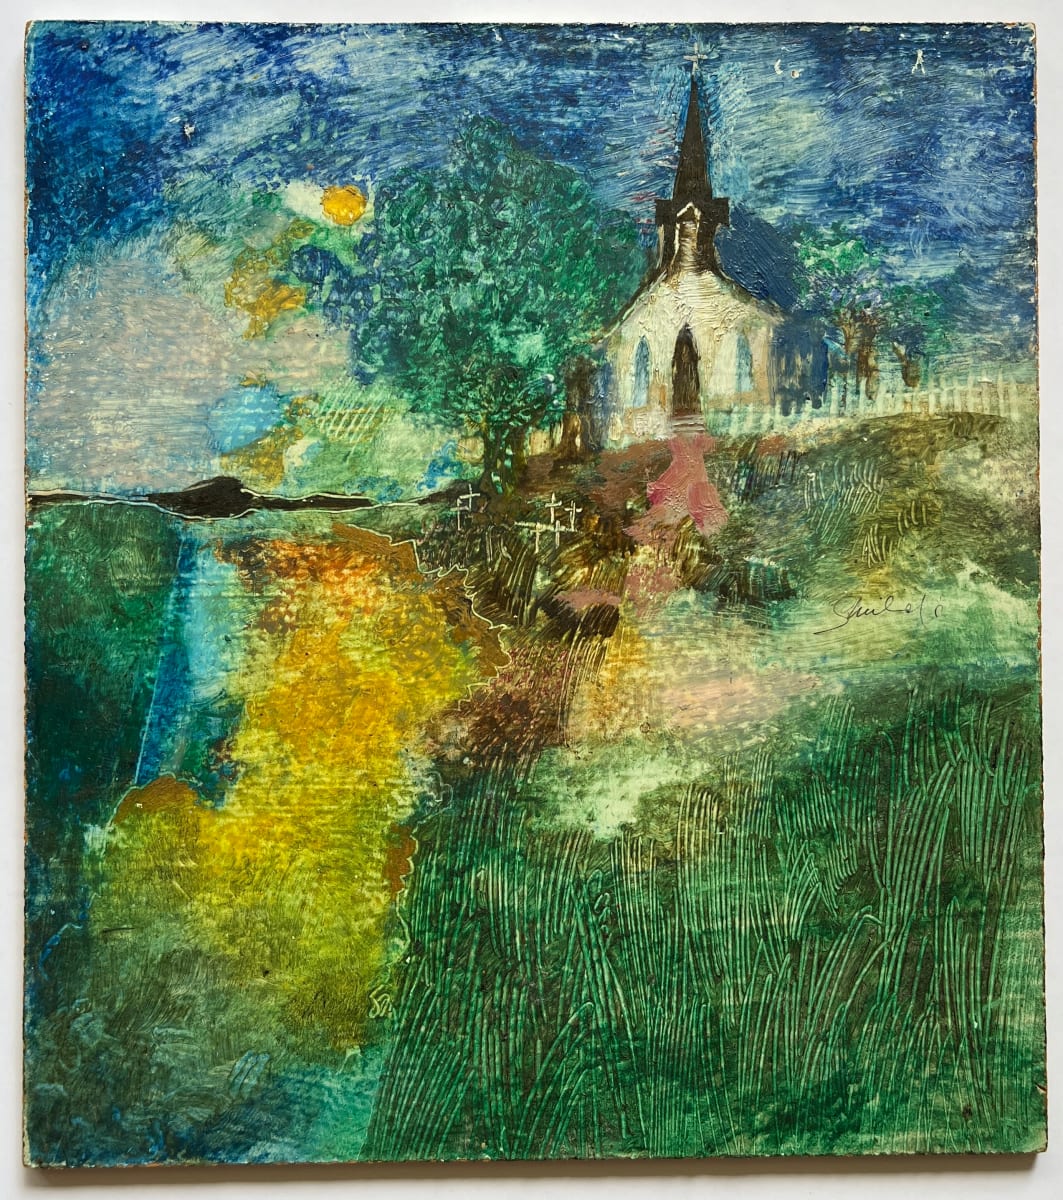 "Church on a Hill" Acrylic Painting on Board by Bill Shields 